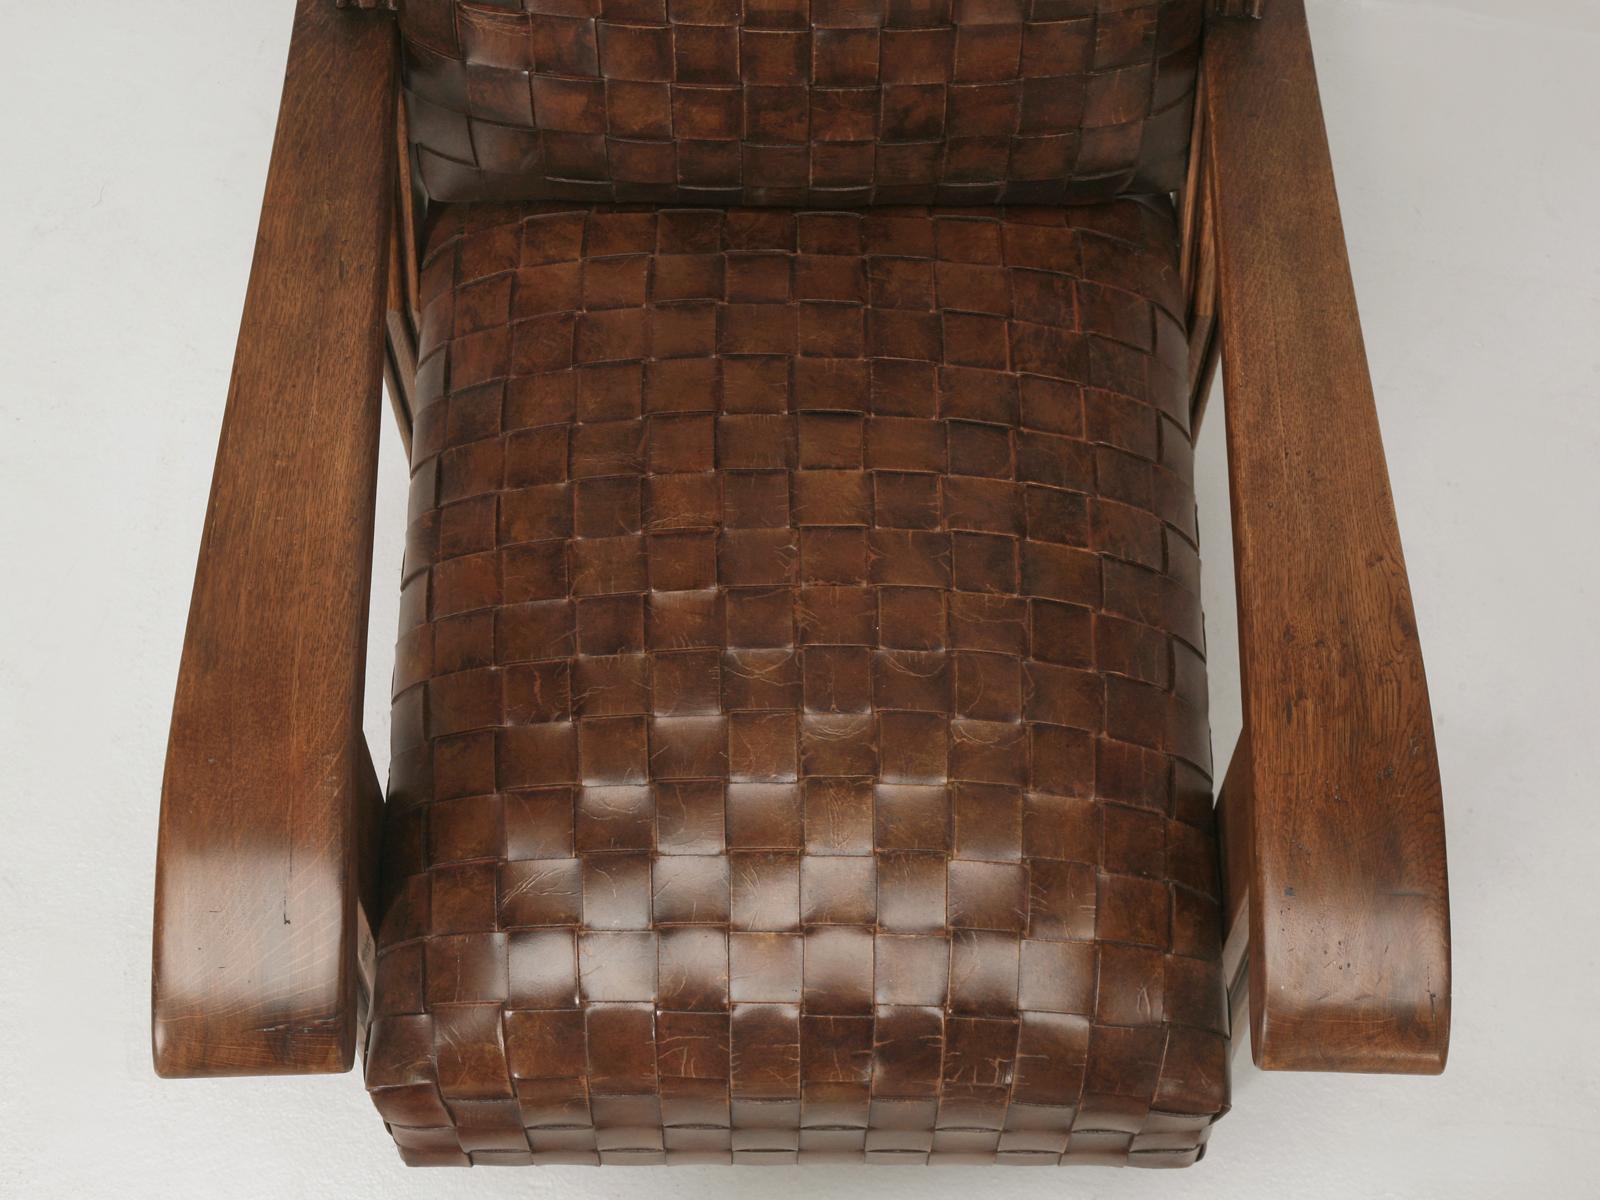 Contemporary  French Woven Leather Club Chairs with Matching Ottomans Available in any Color For Sale